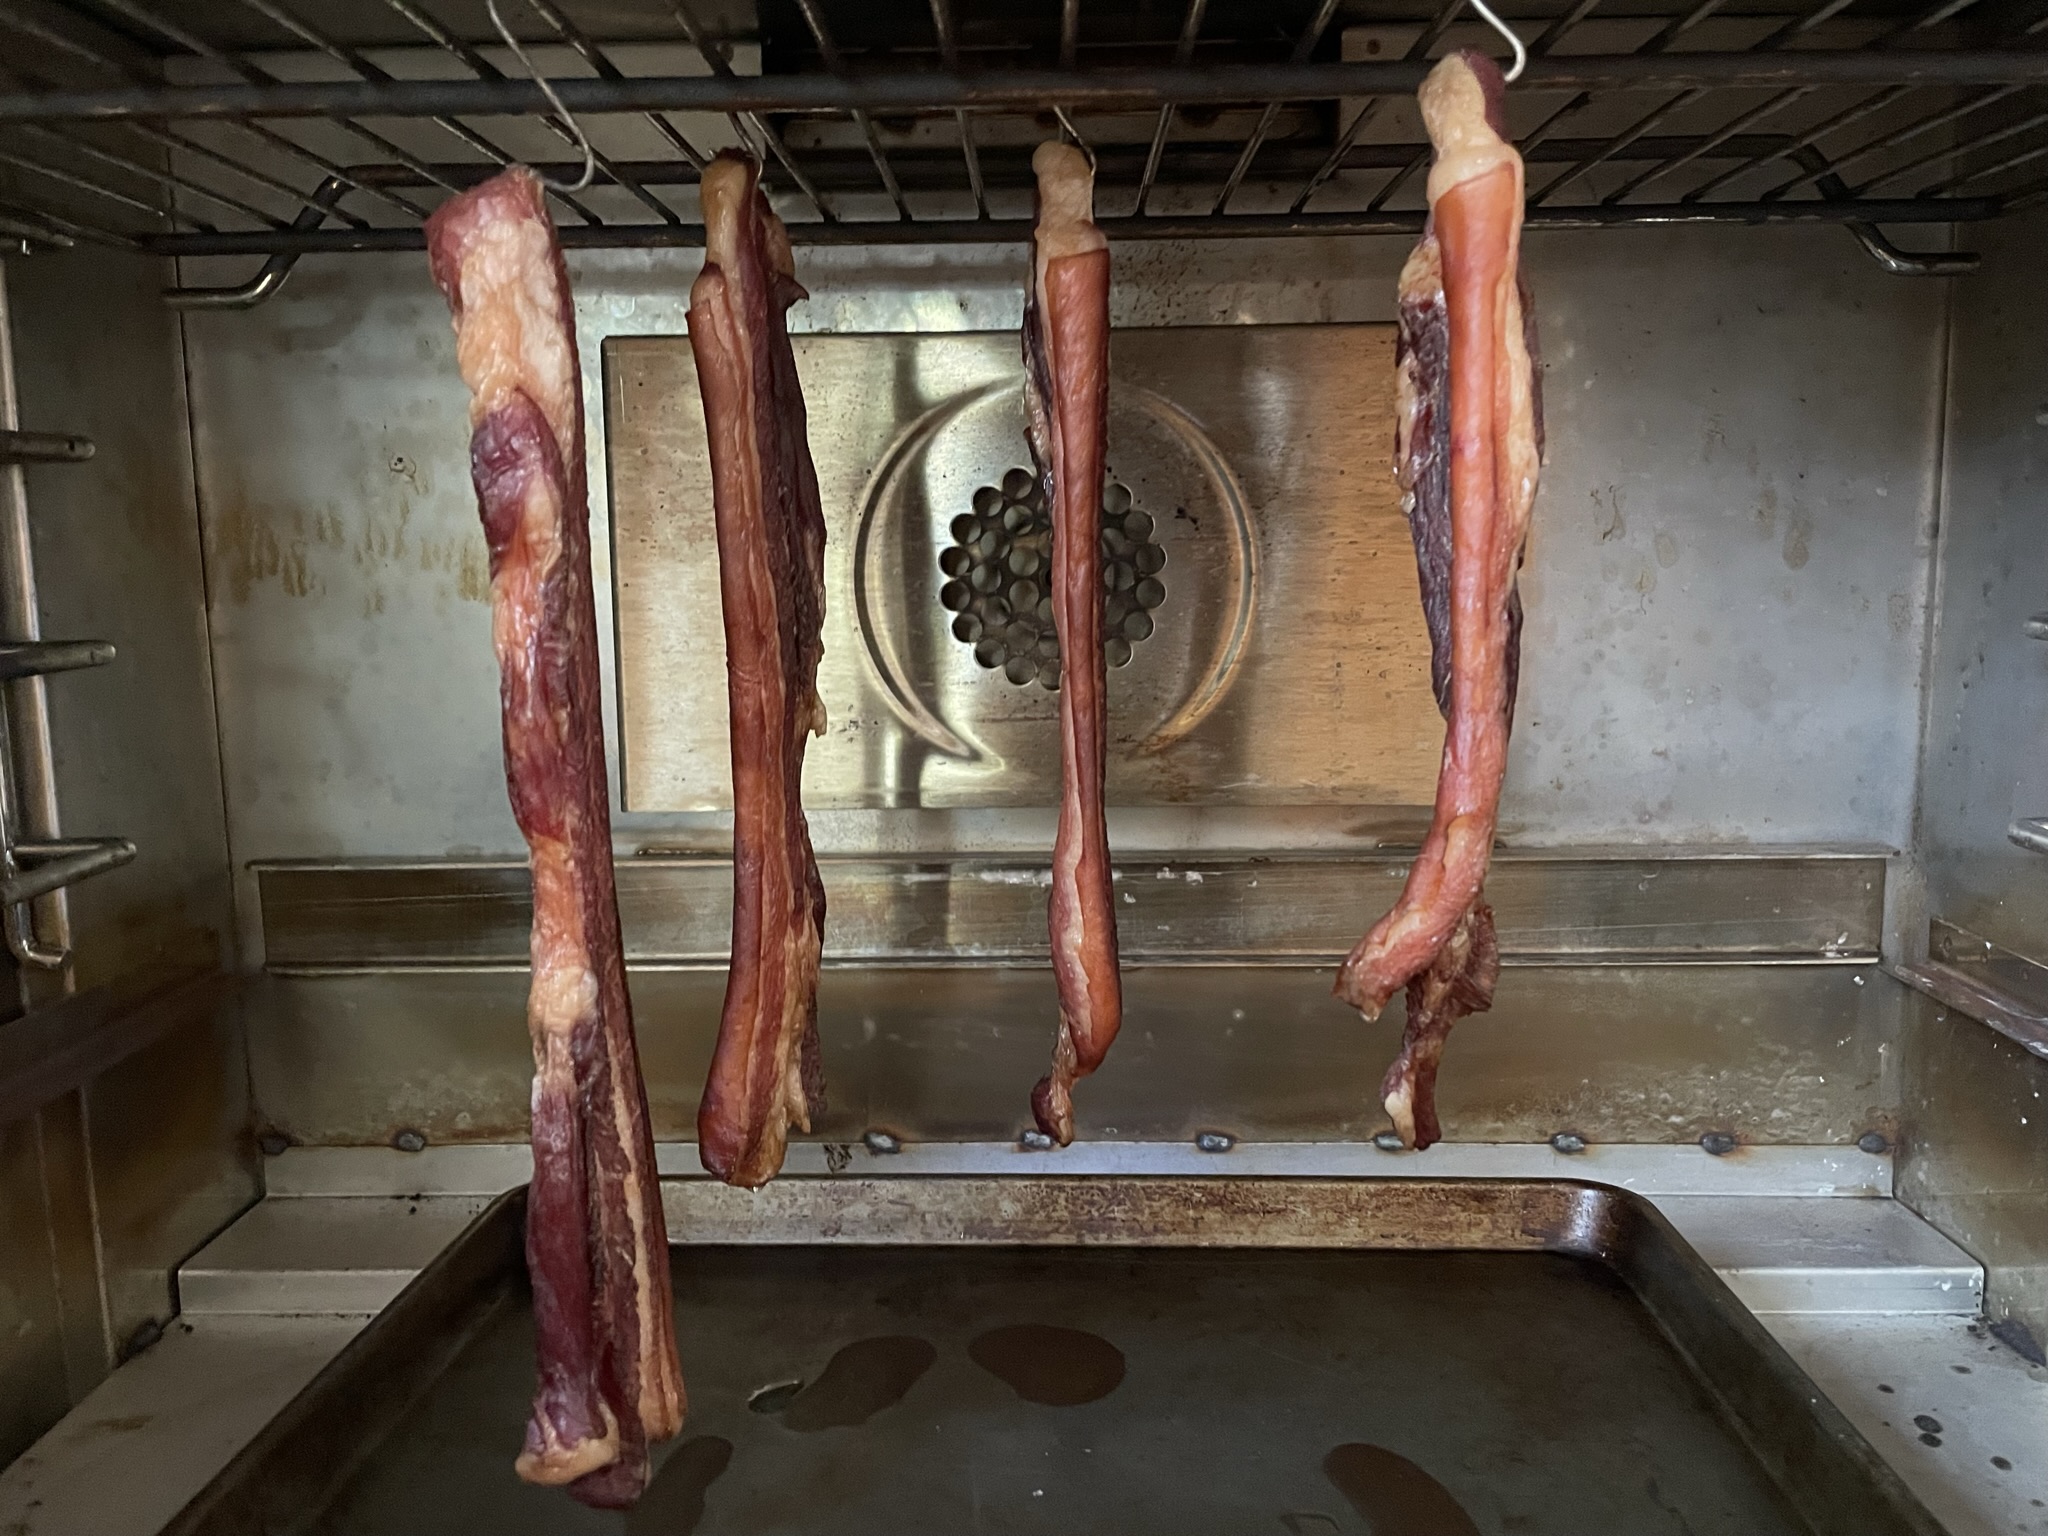 Drying Chinese bacon.